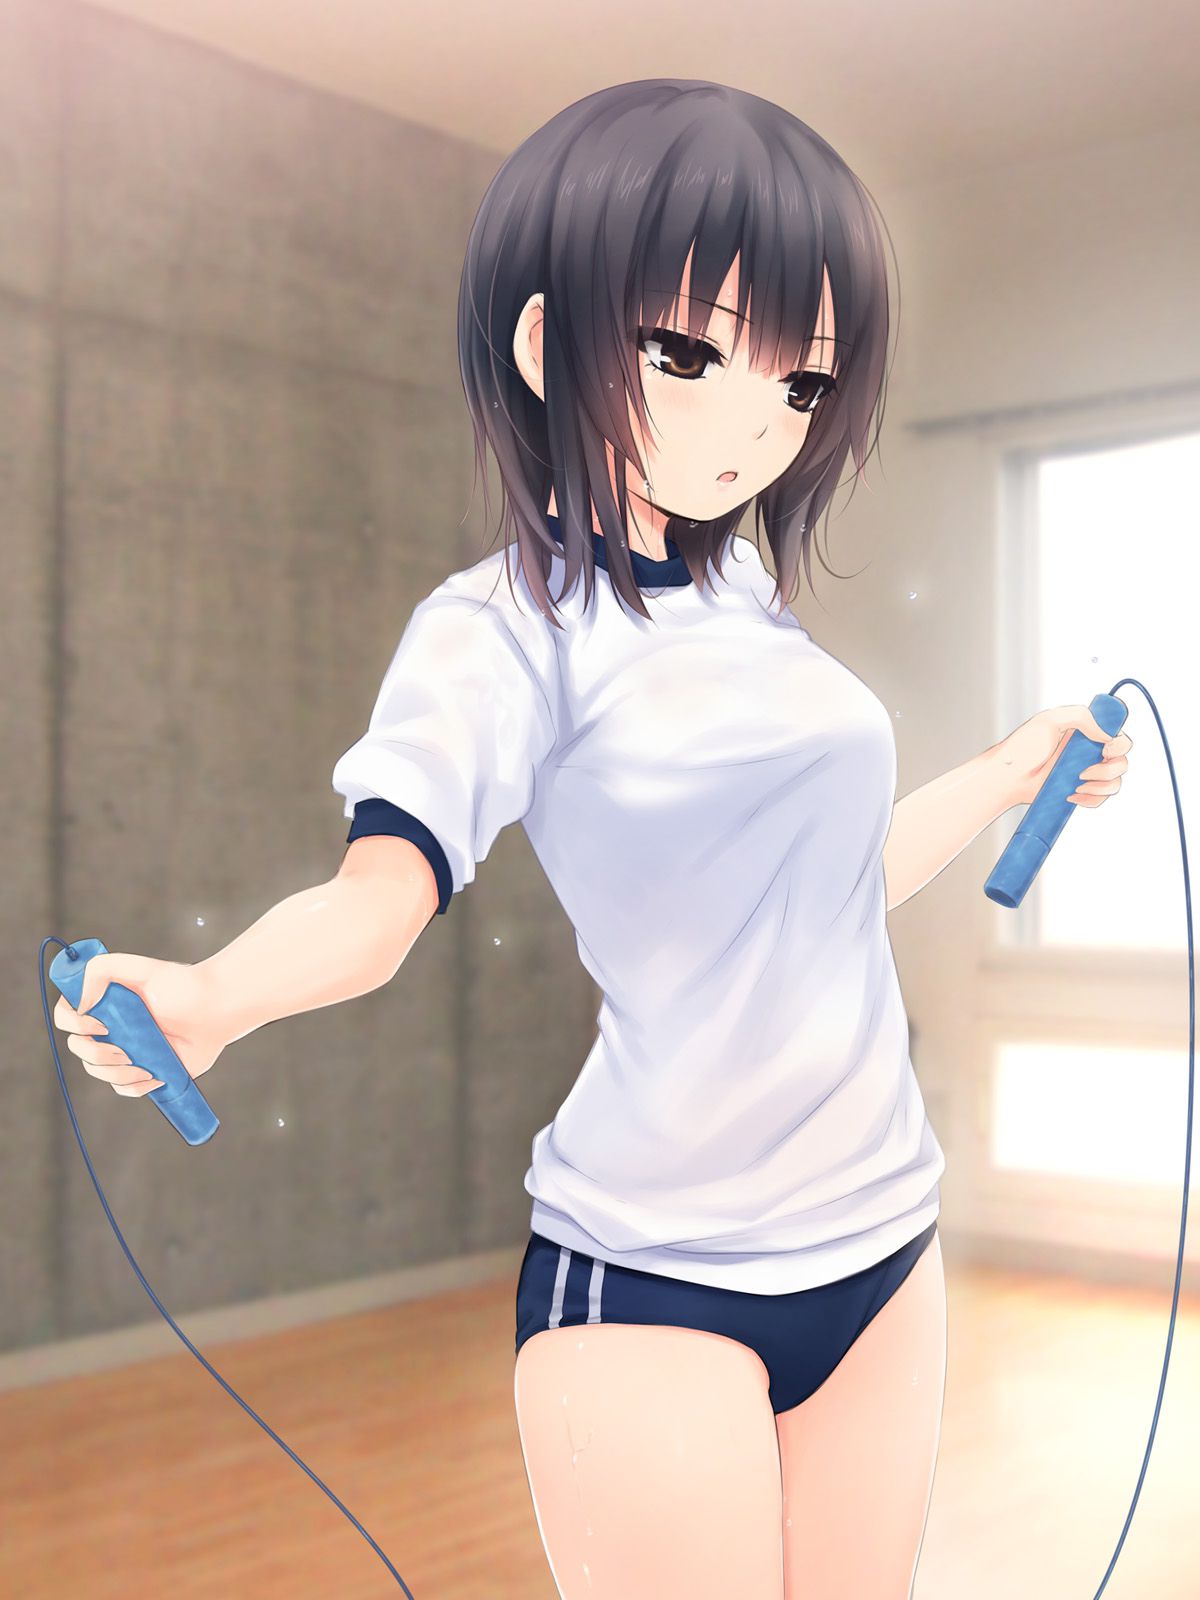 Two-dimensional bloomers picture assortment of Whip whip. vol.36 22